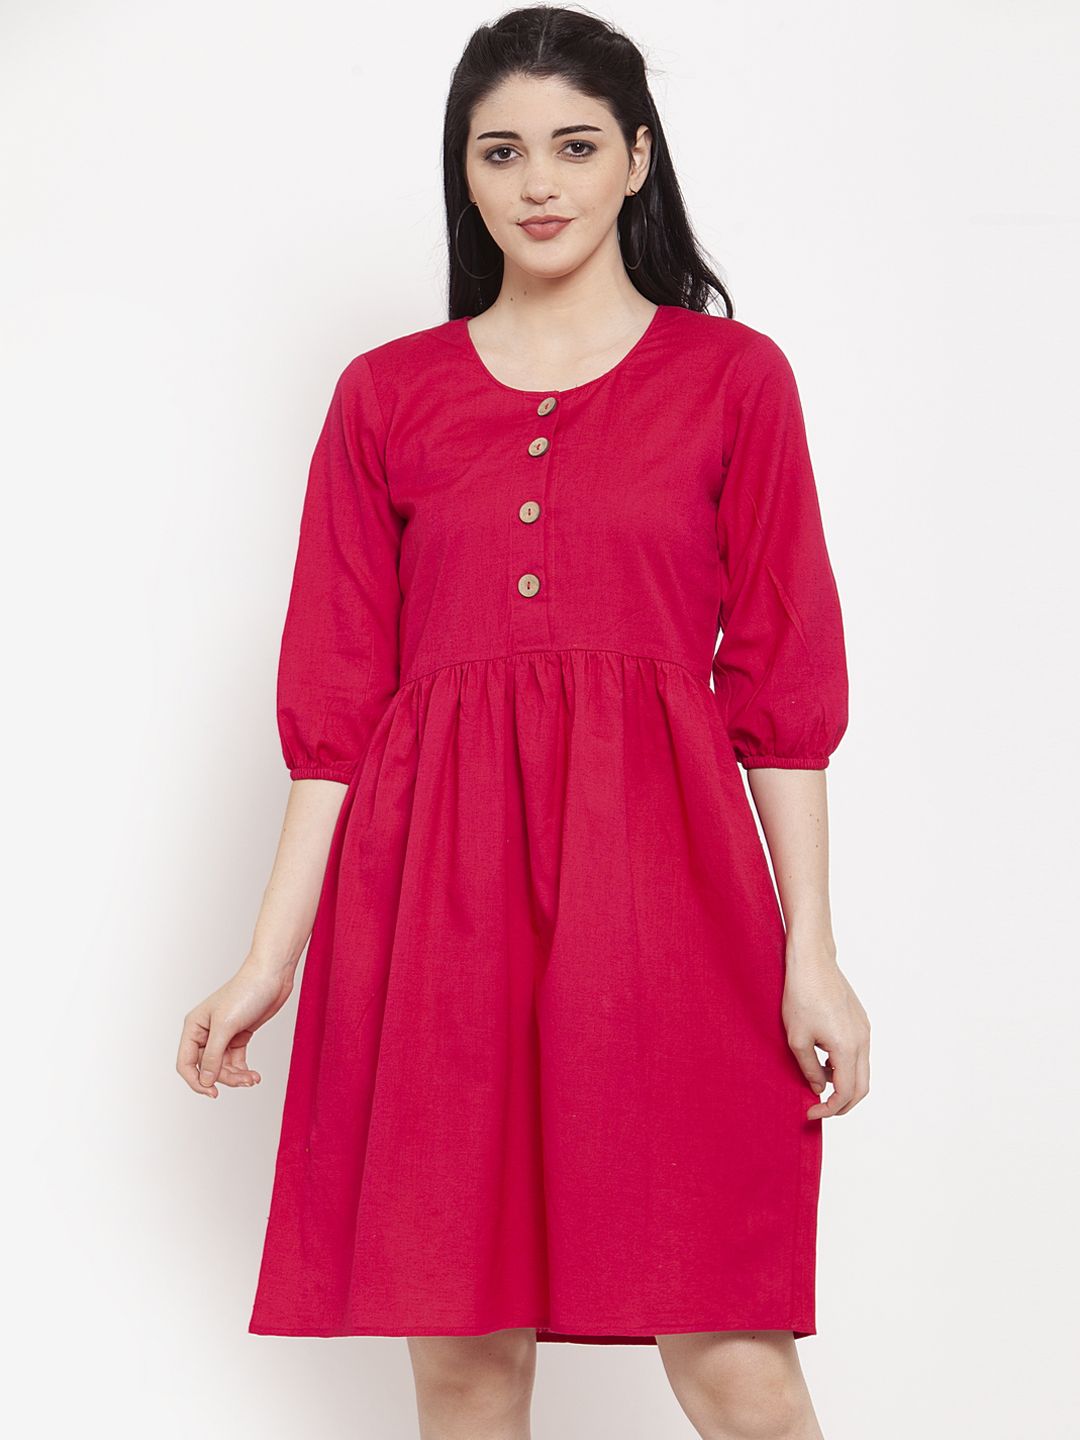 ANAISA Women Pink Solid Fit and Flare Dress Price in India